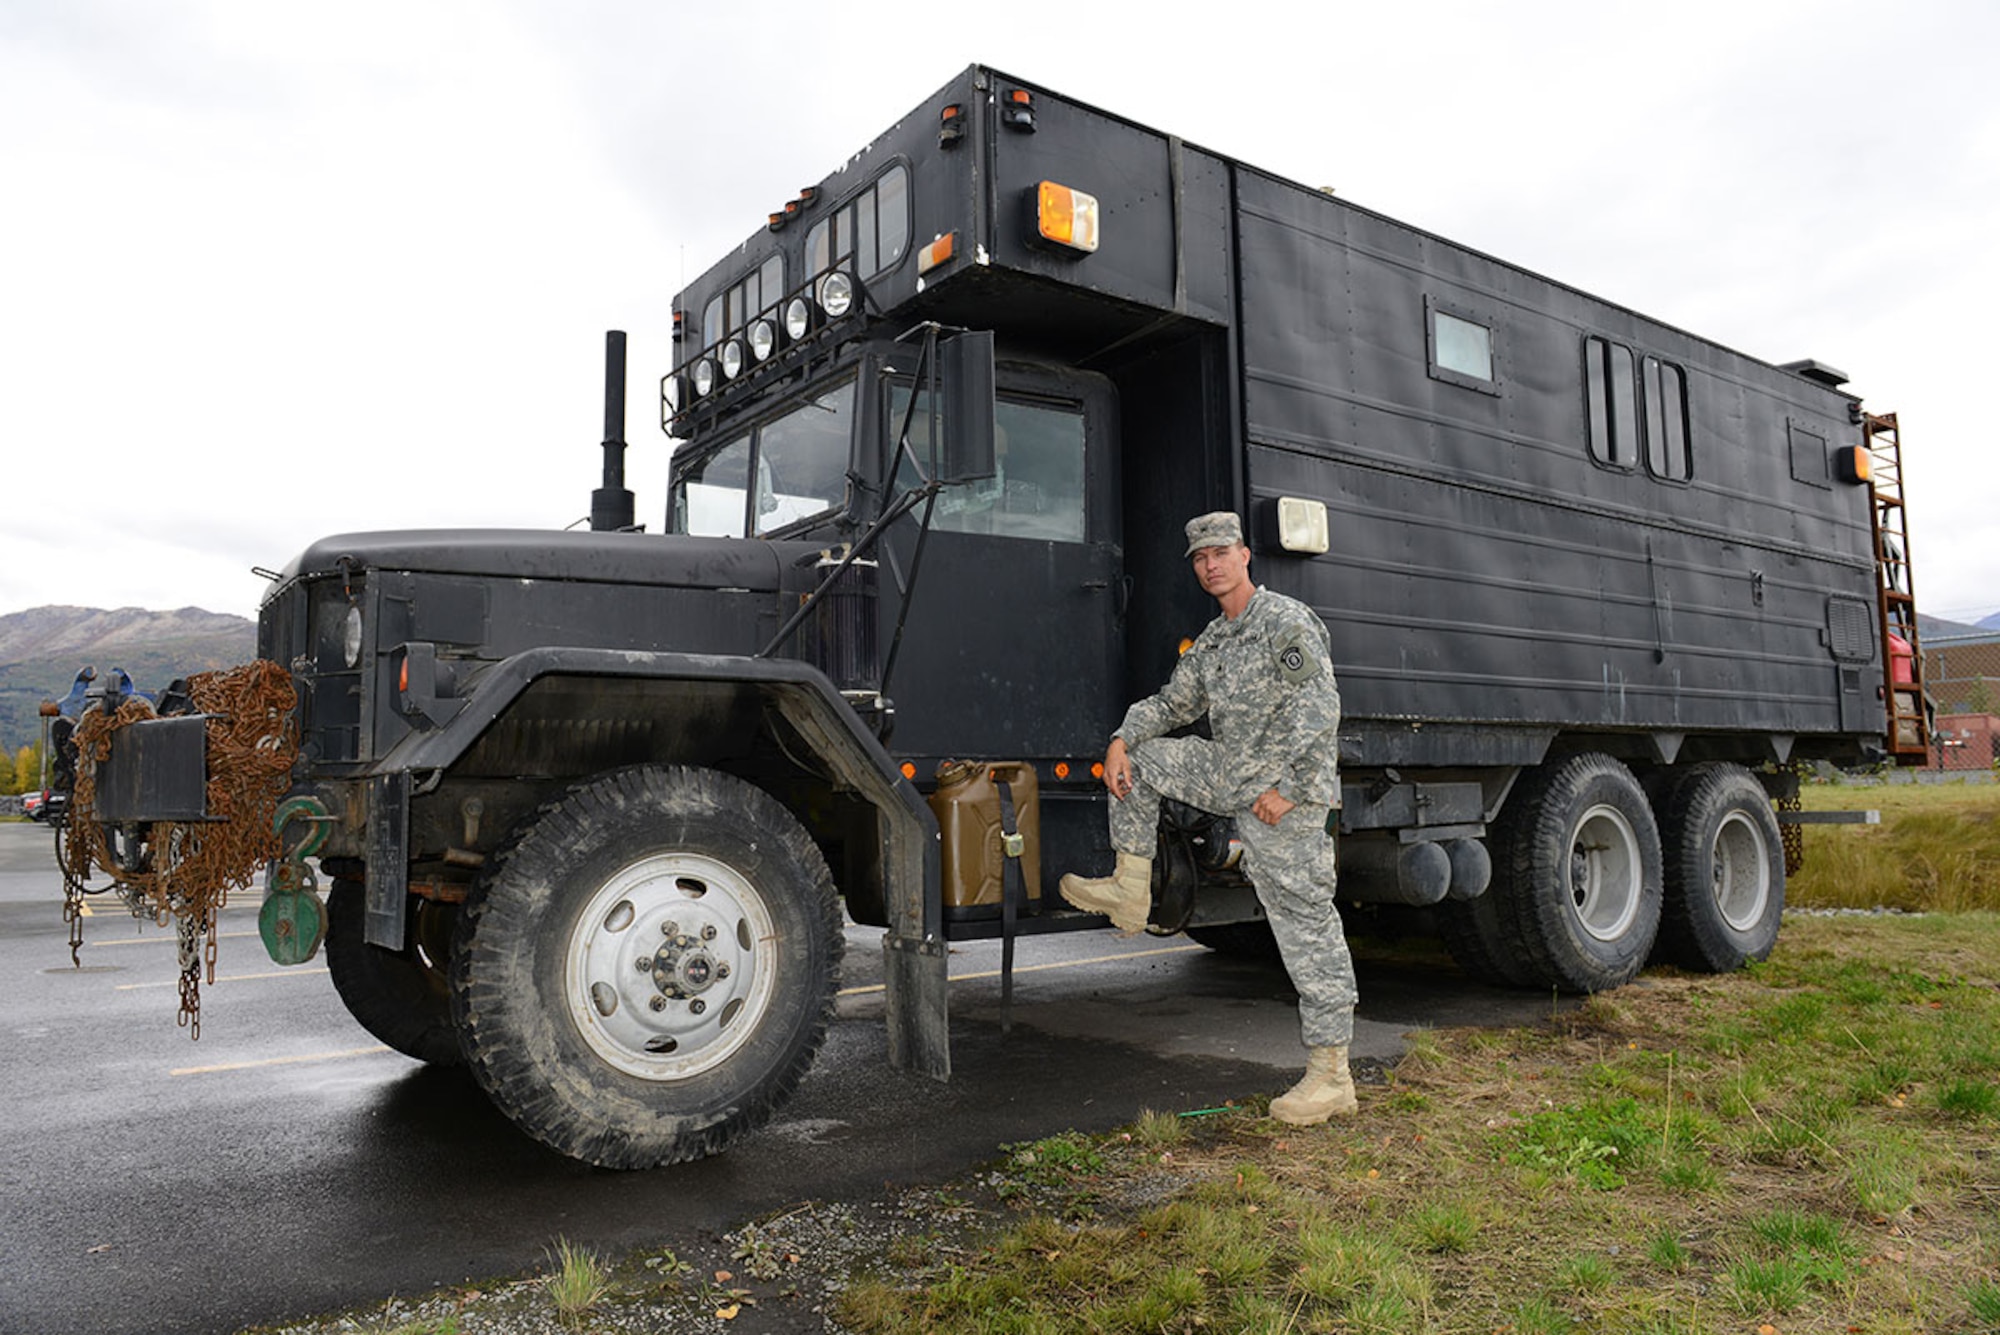 Army mechanic builds monster RV on military surplus chassis > Joint ...